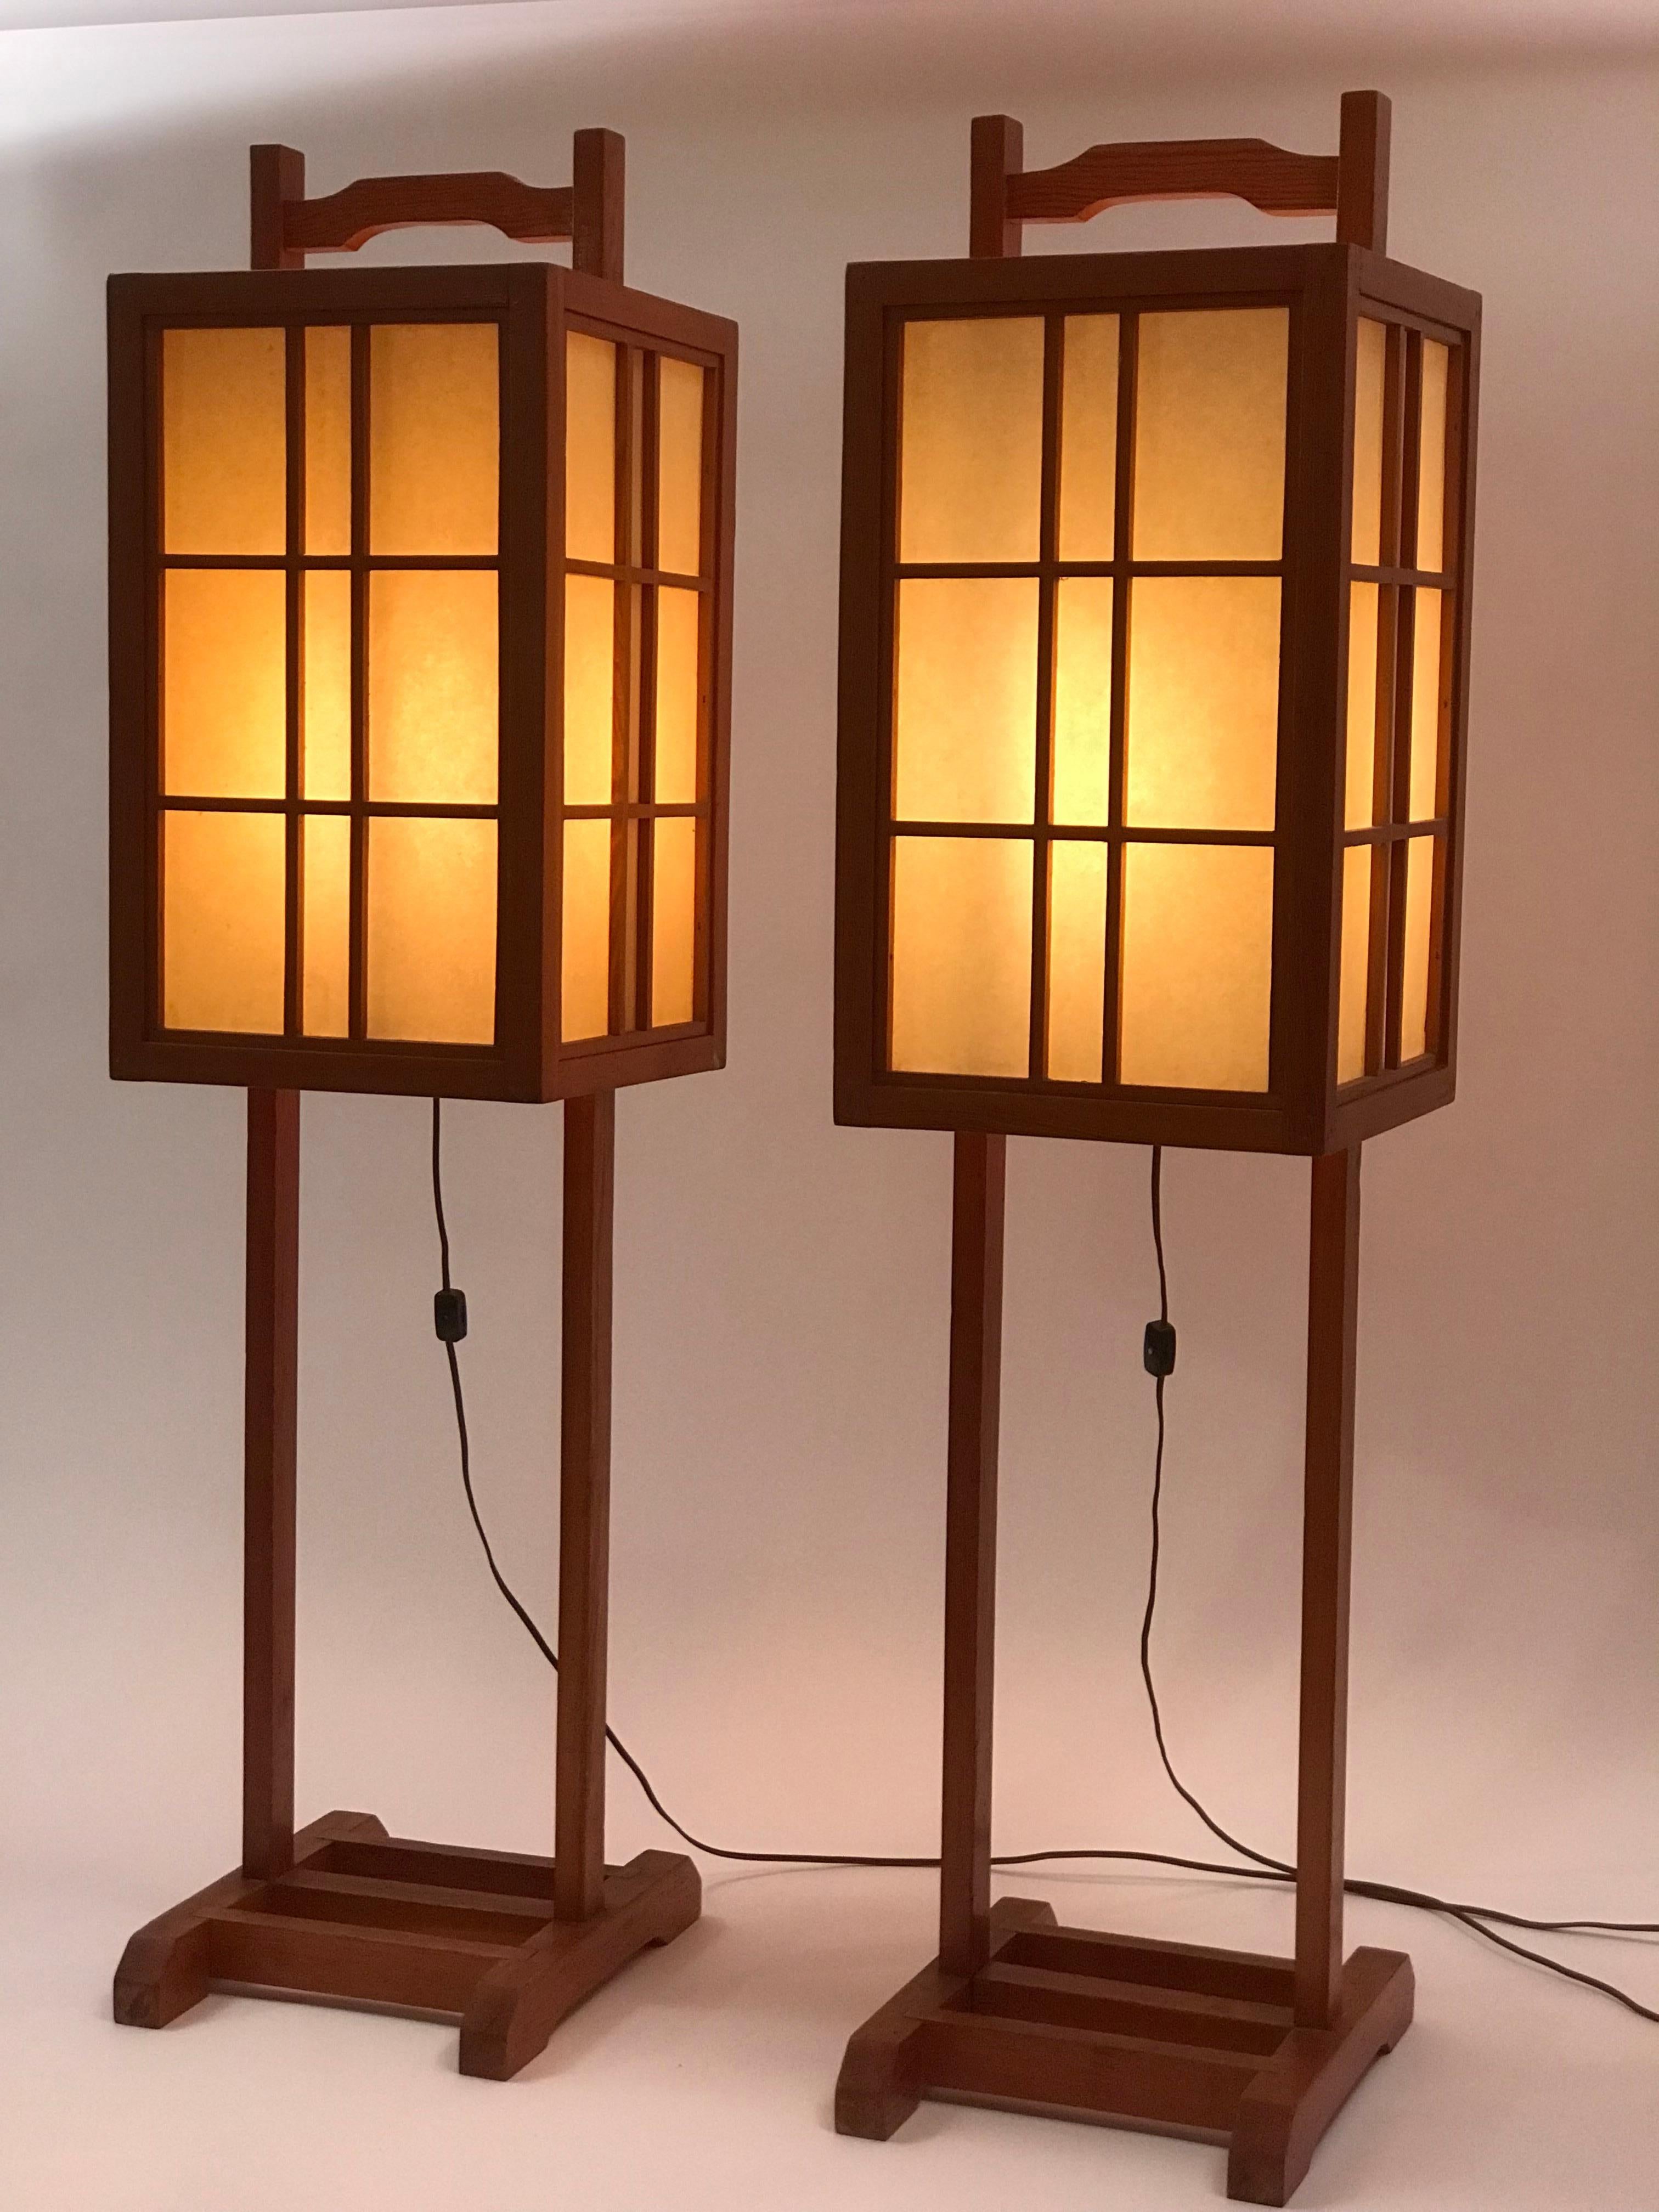 A pair of Japanese inspired wooden floor lanterns with pagoda style framing and a textured vellum amber toned diffuser. Hand made in California probably in a Valley/Van Nuys studio from the late 60's through the mid 70's. Framed in a local softwood